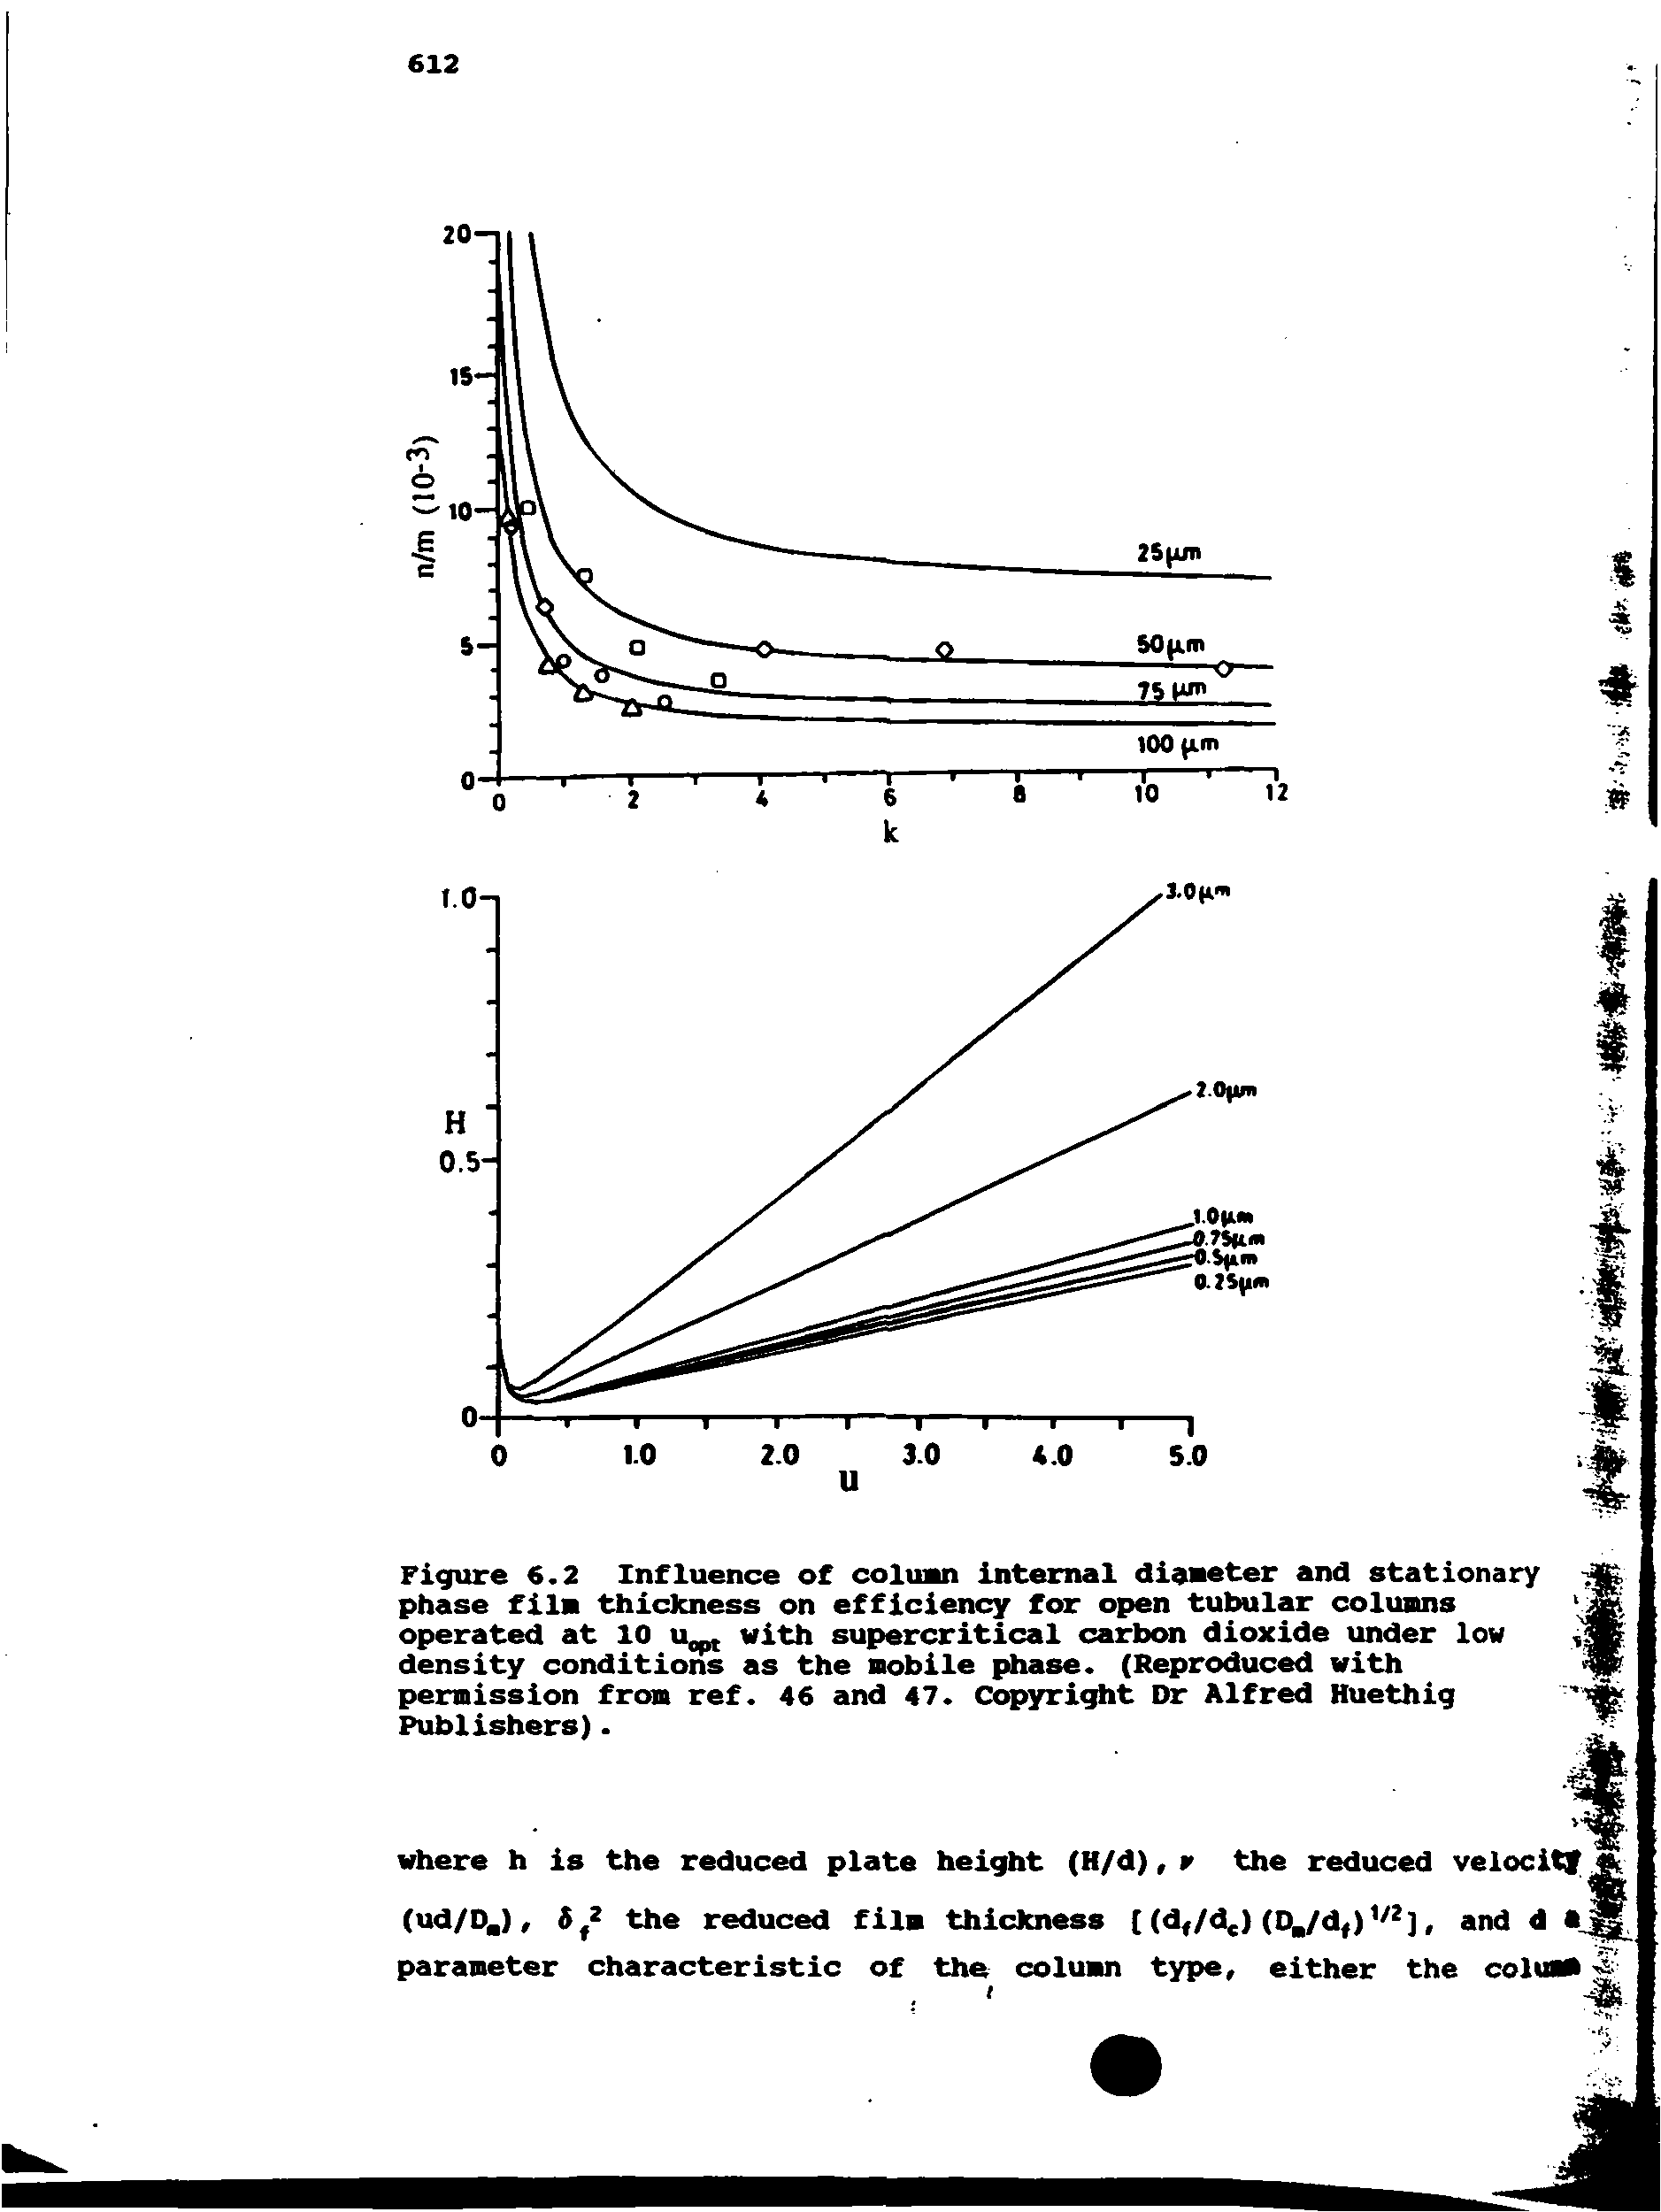 Figure 6.2 Influence of colunn internal diaeeter and stationary phase filn thickness on efficiency for open tubular colunns operated at 10 u with supercritical carbon dioxide under low density conditions as the nobile phase. (Reproduced with pemission from ref. 46 and 47. Copyright Dr Alfred Huethig Publishers).